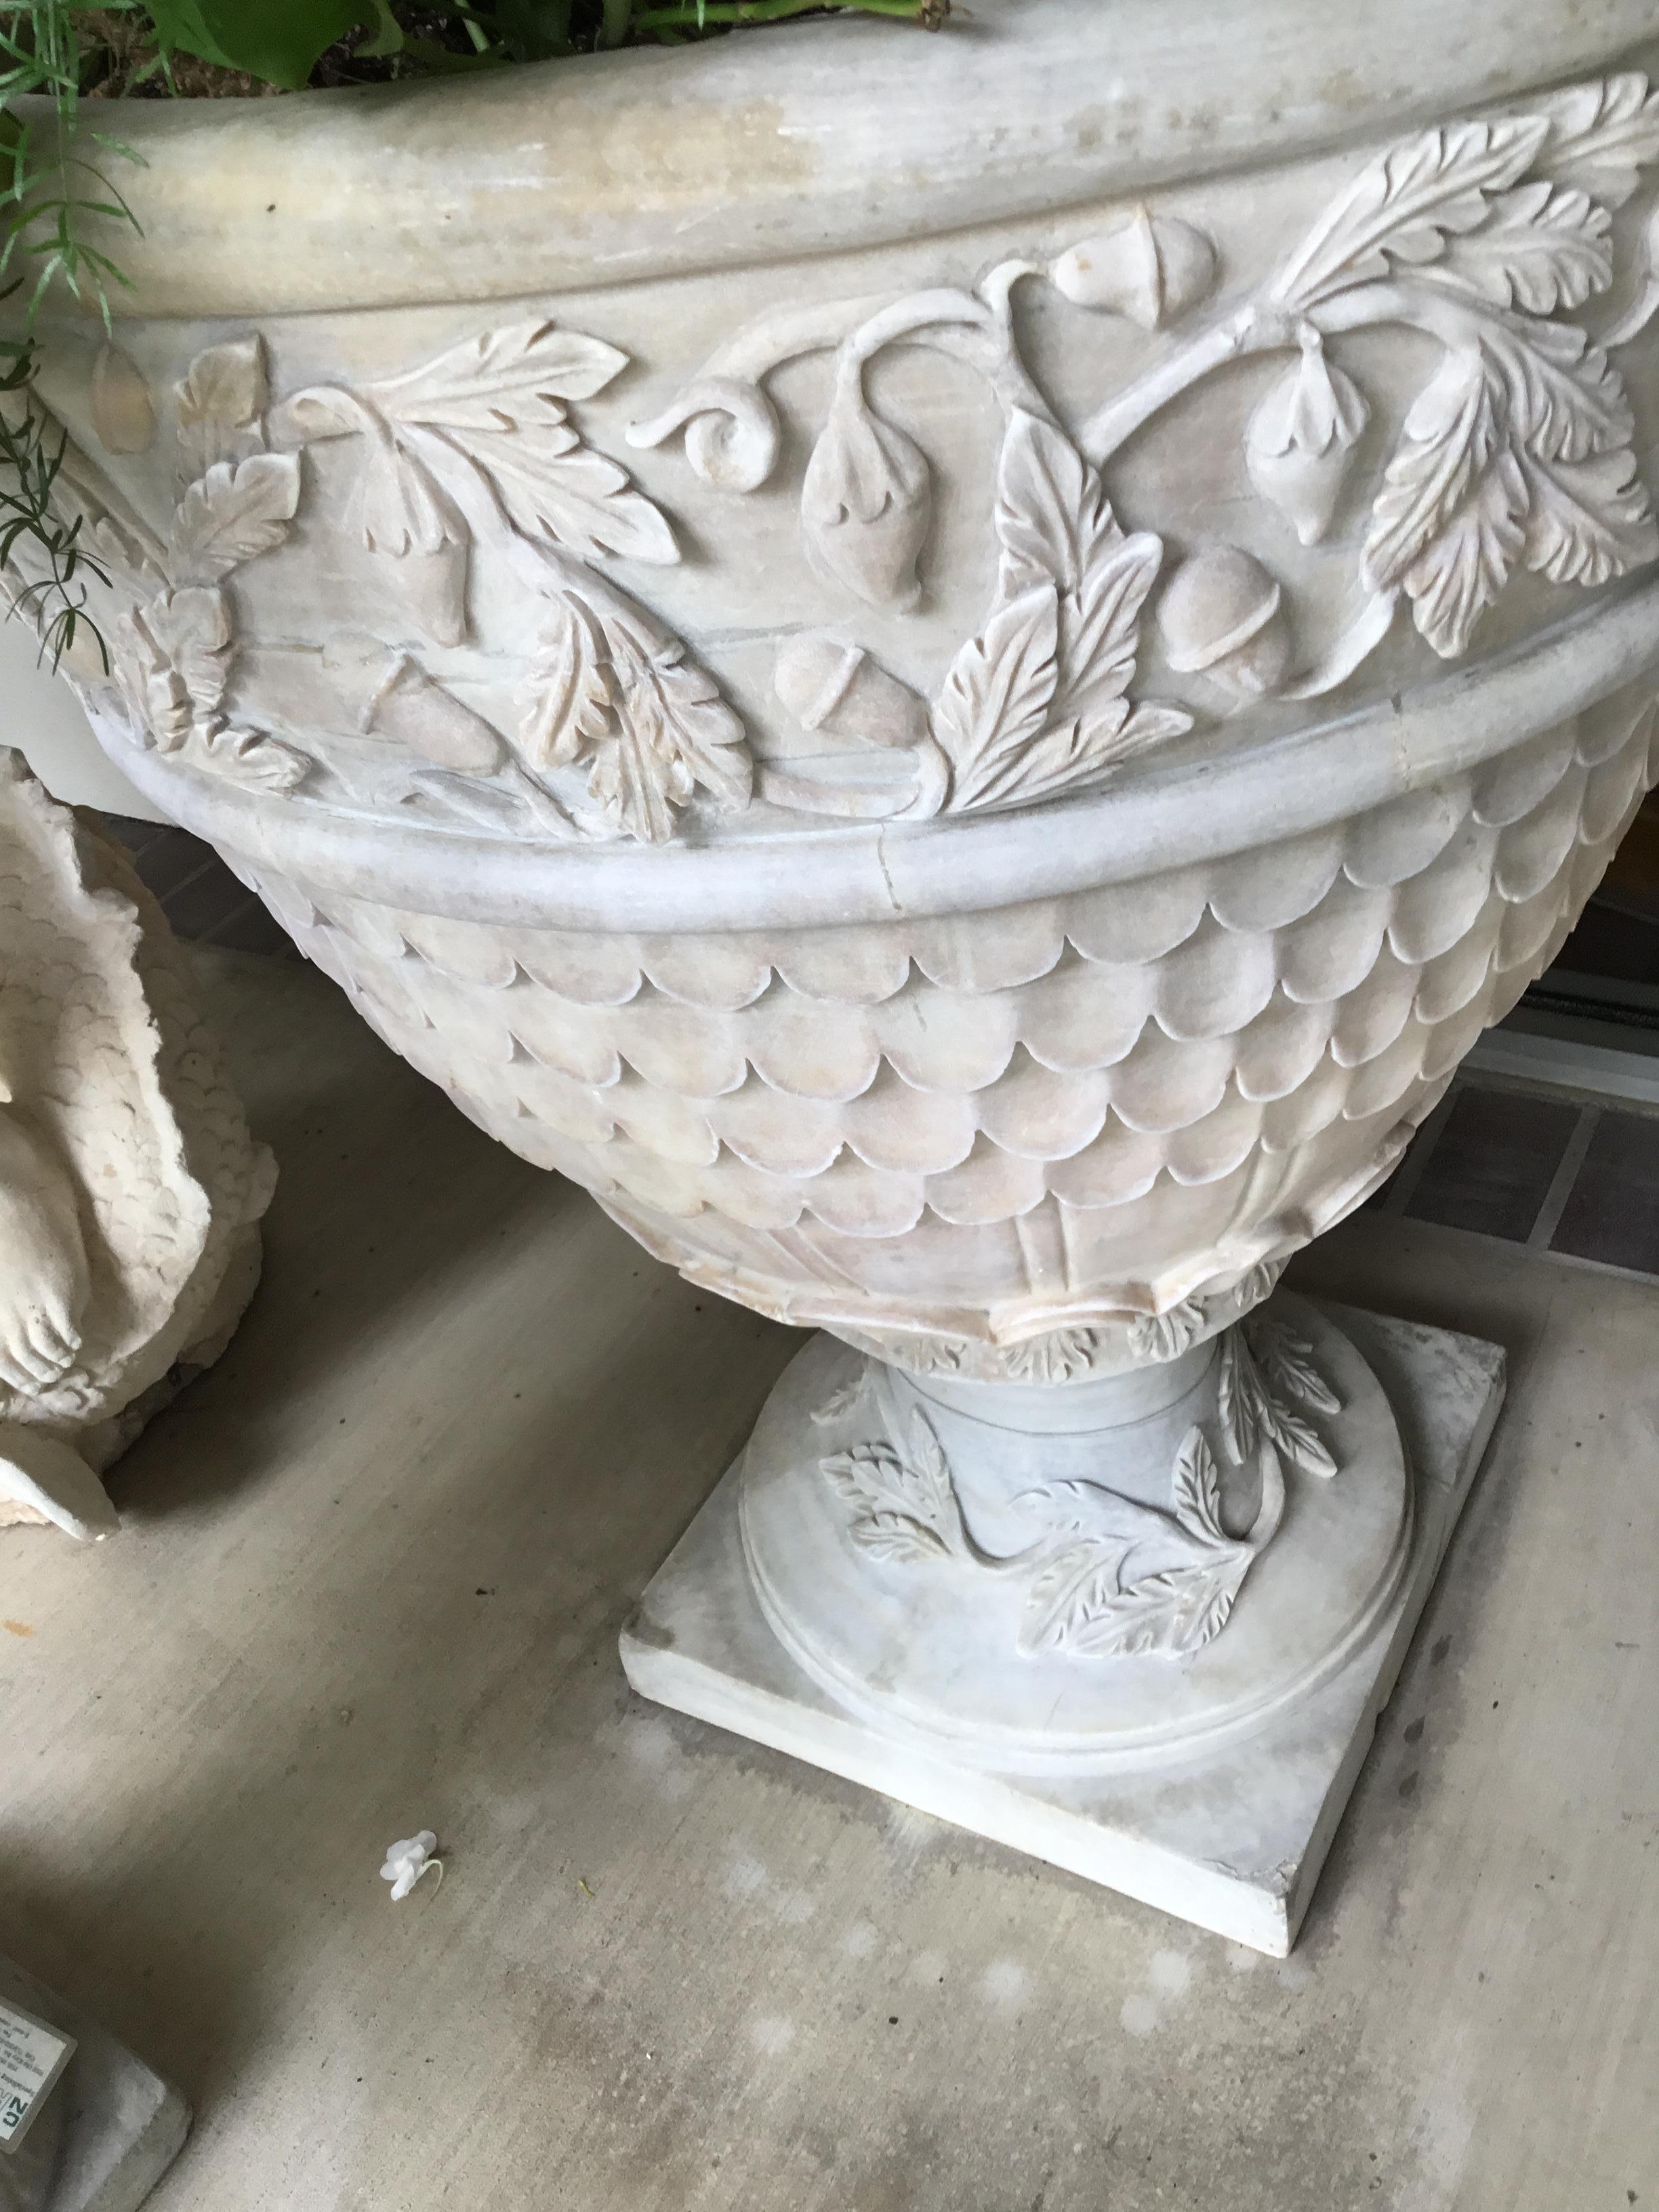 Exceptional quality vintage hand carved white marble planters
In neoclassical style. Great addition to entry or garden.